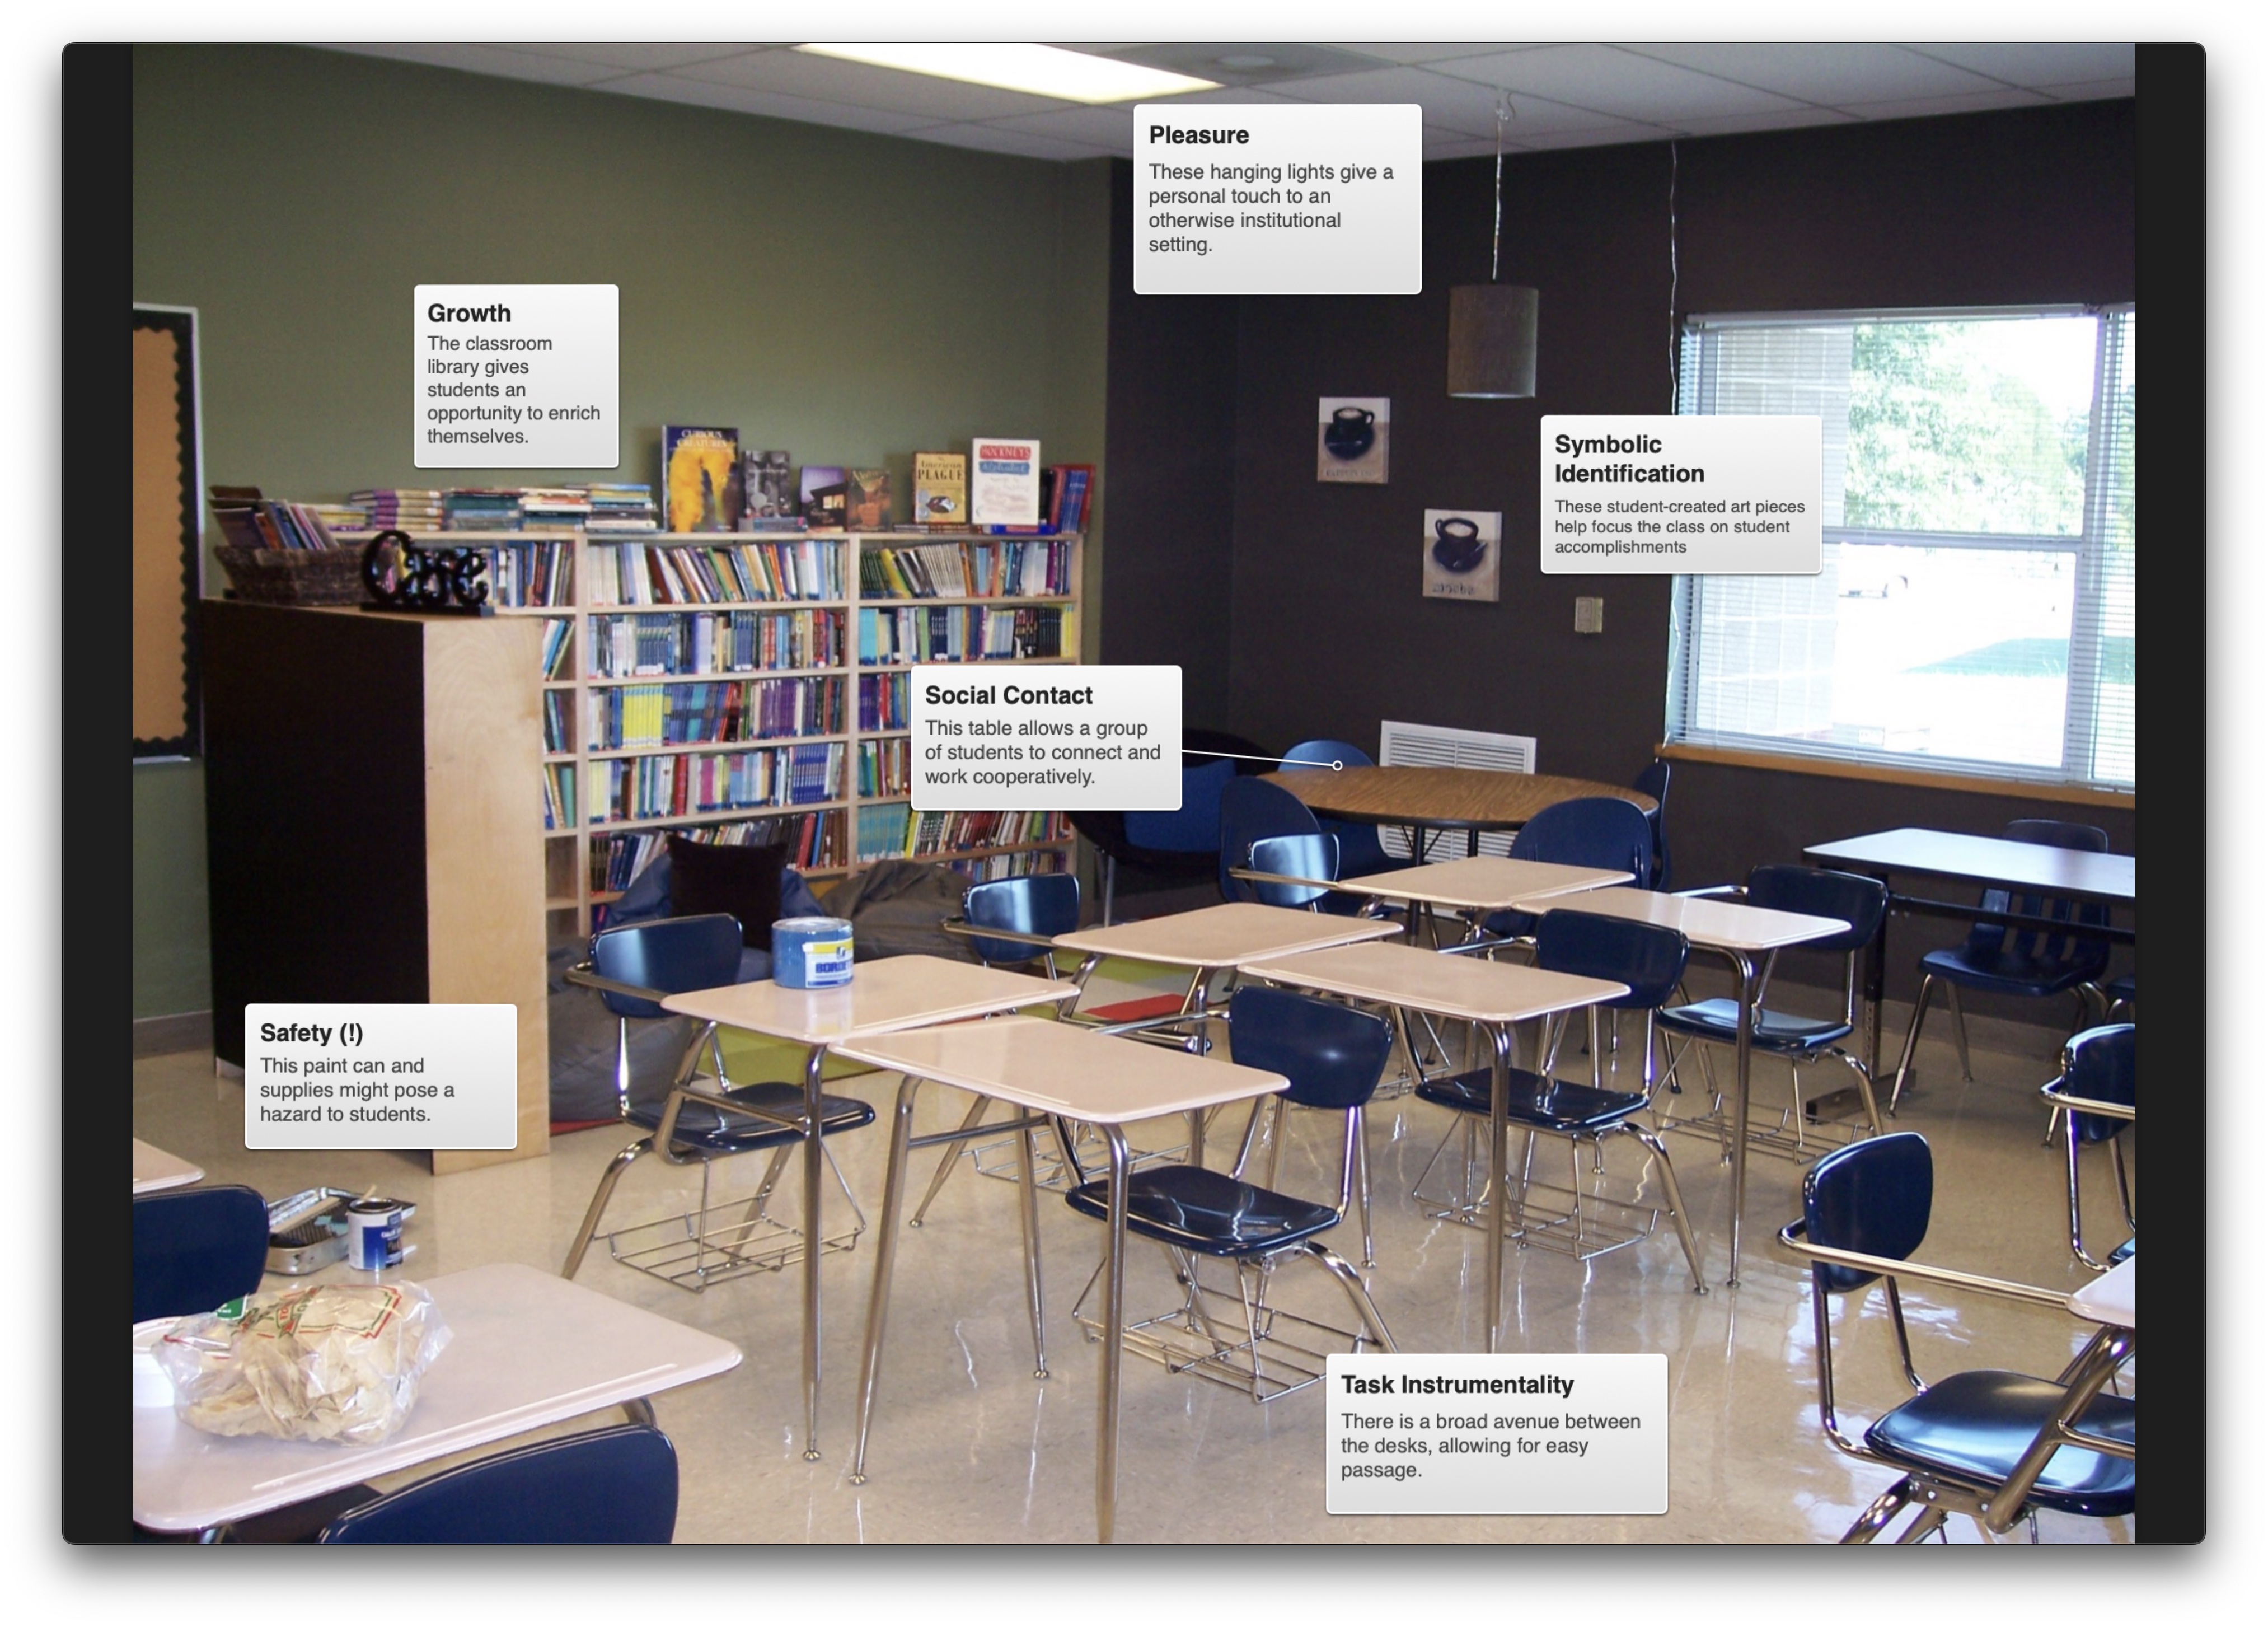 Image of classroom with annotations of effective physical classroom arrangement